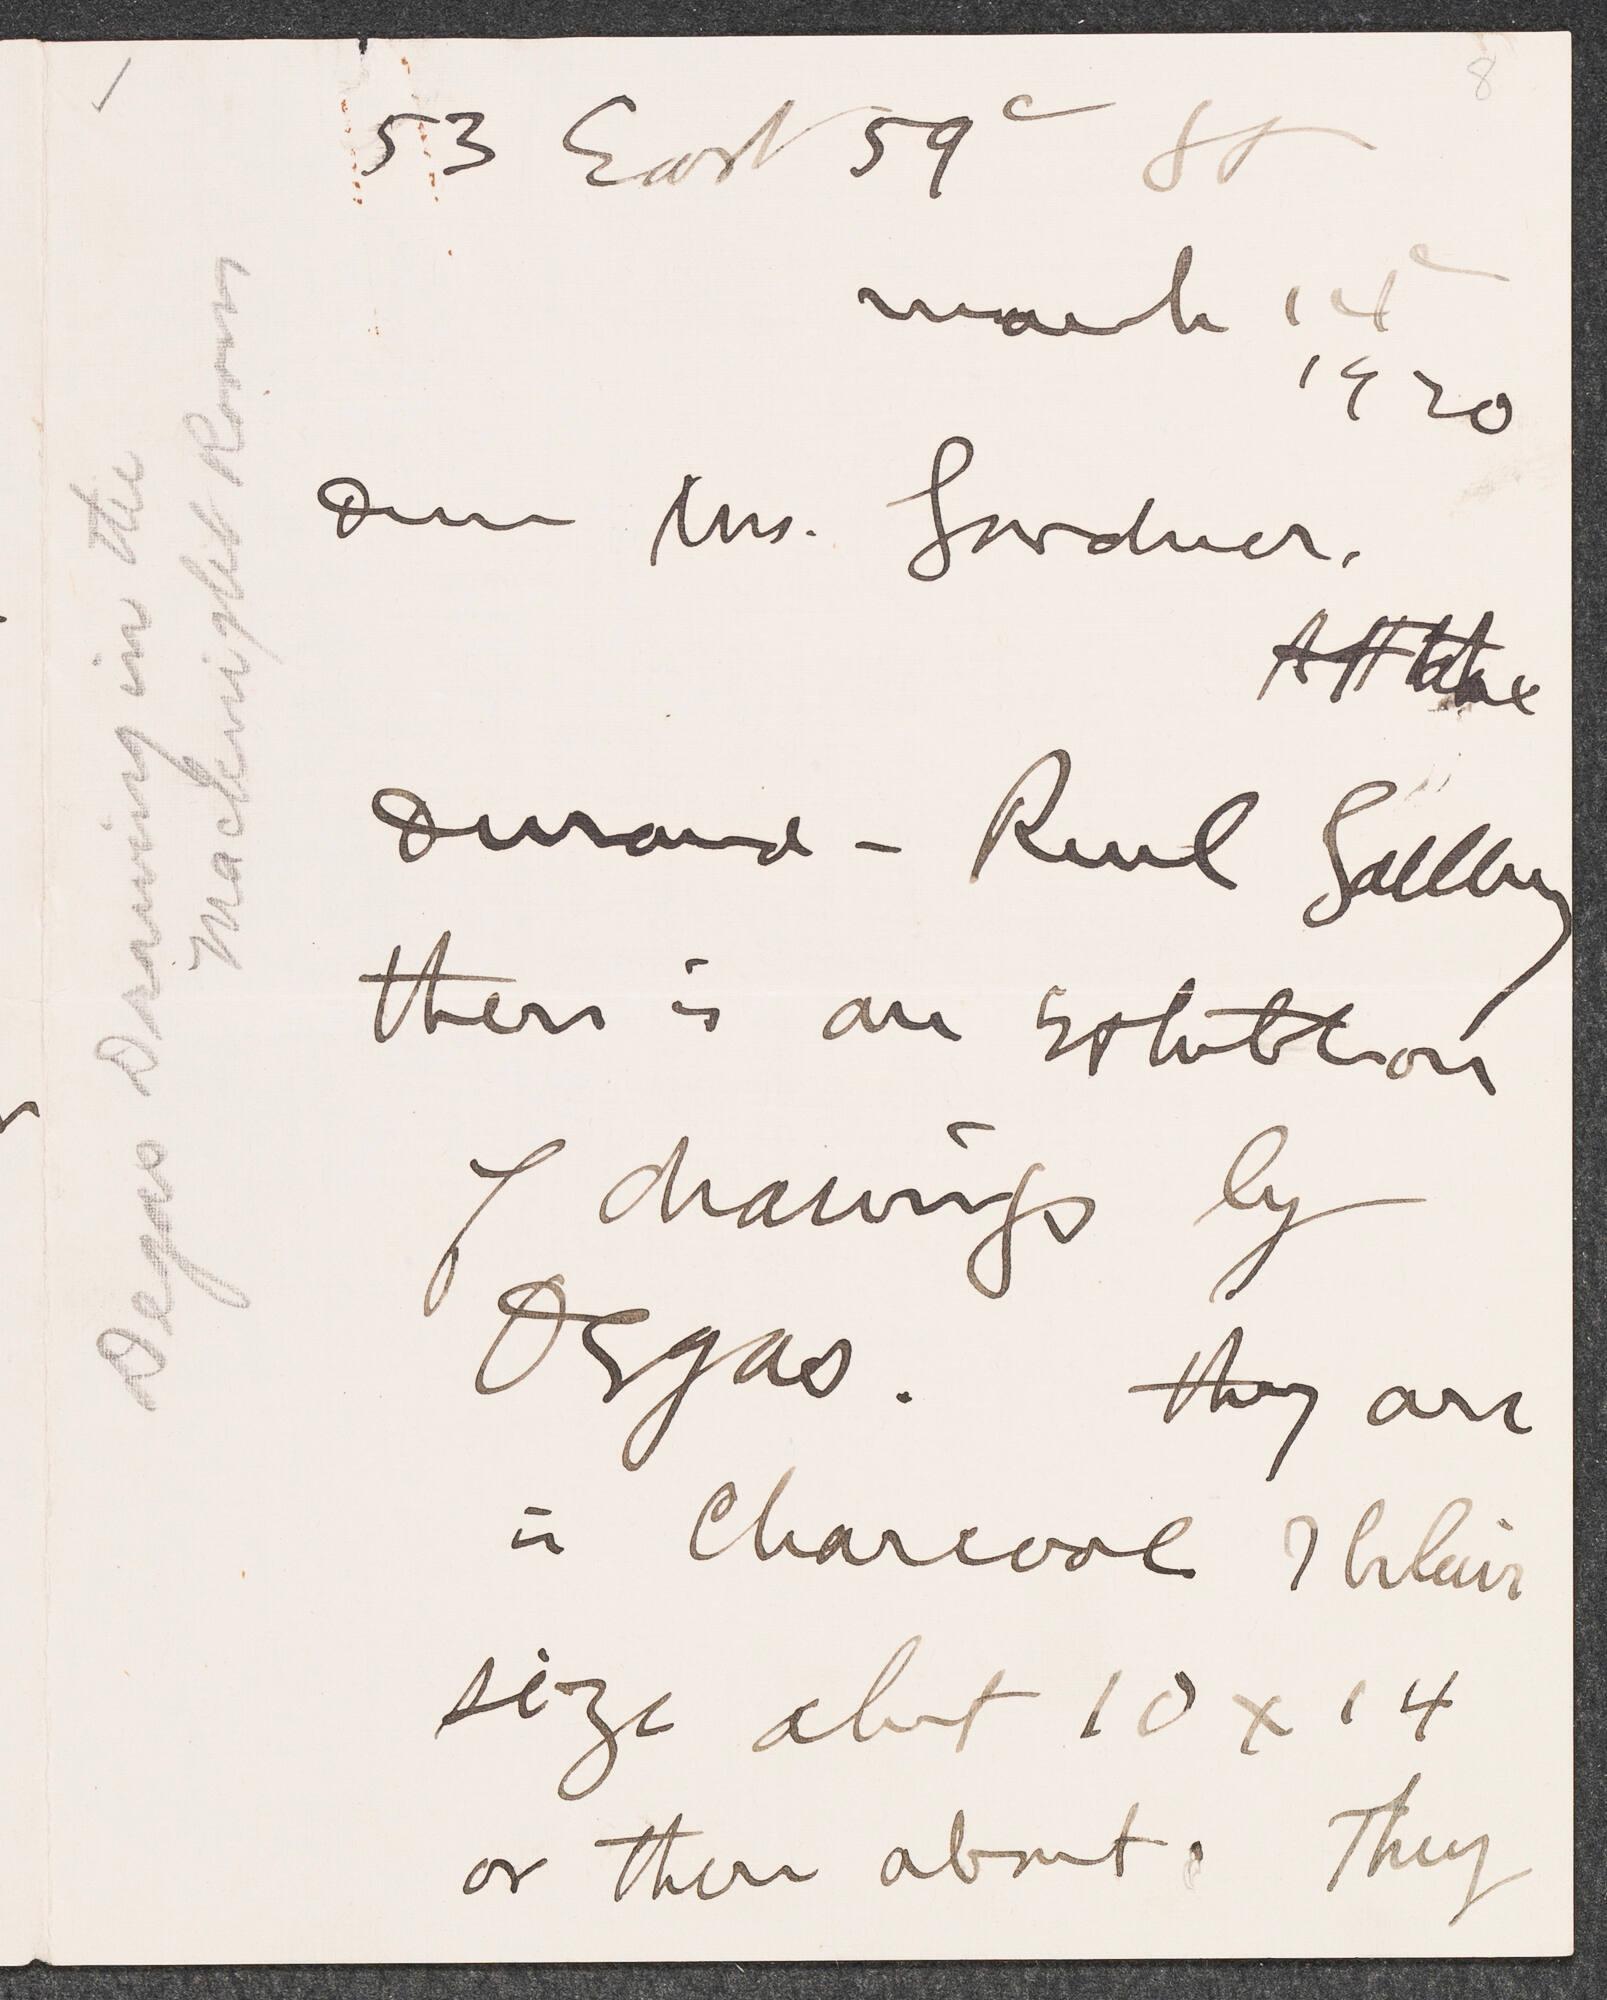 A cream colored sheet of paper with handwriting in black ink from Louis Kronberg to Isabella Stewart Gardner.